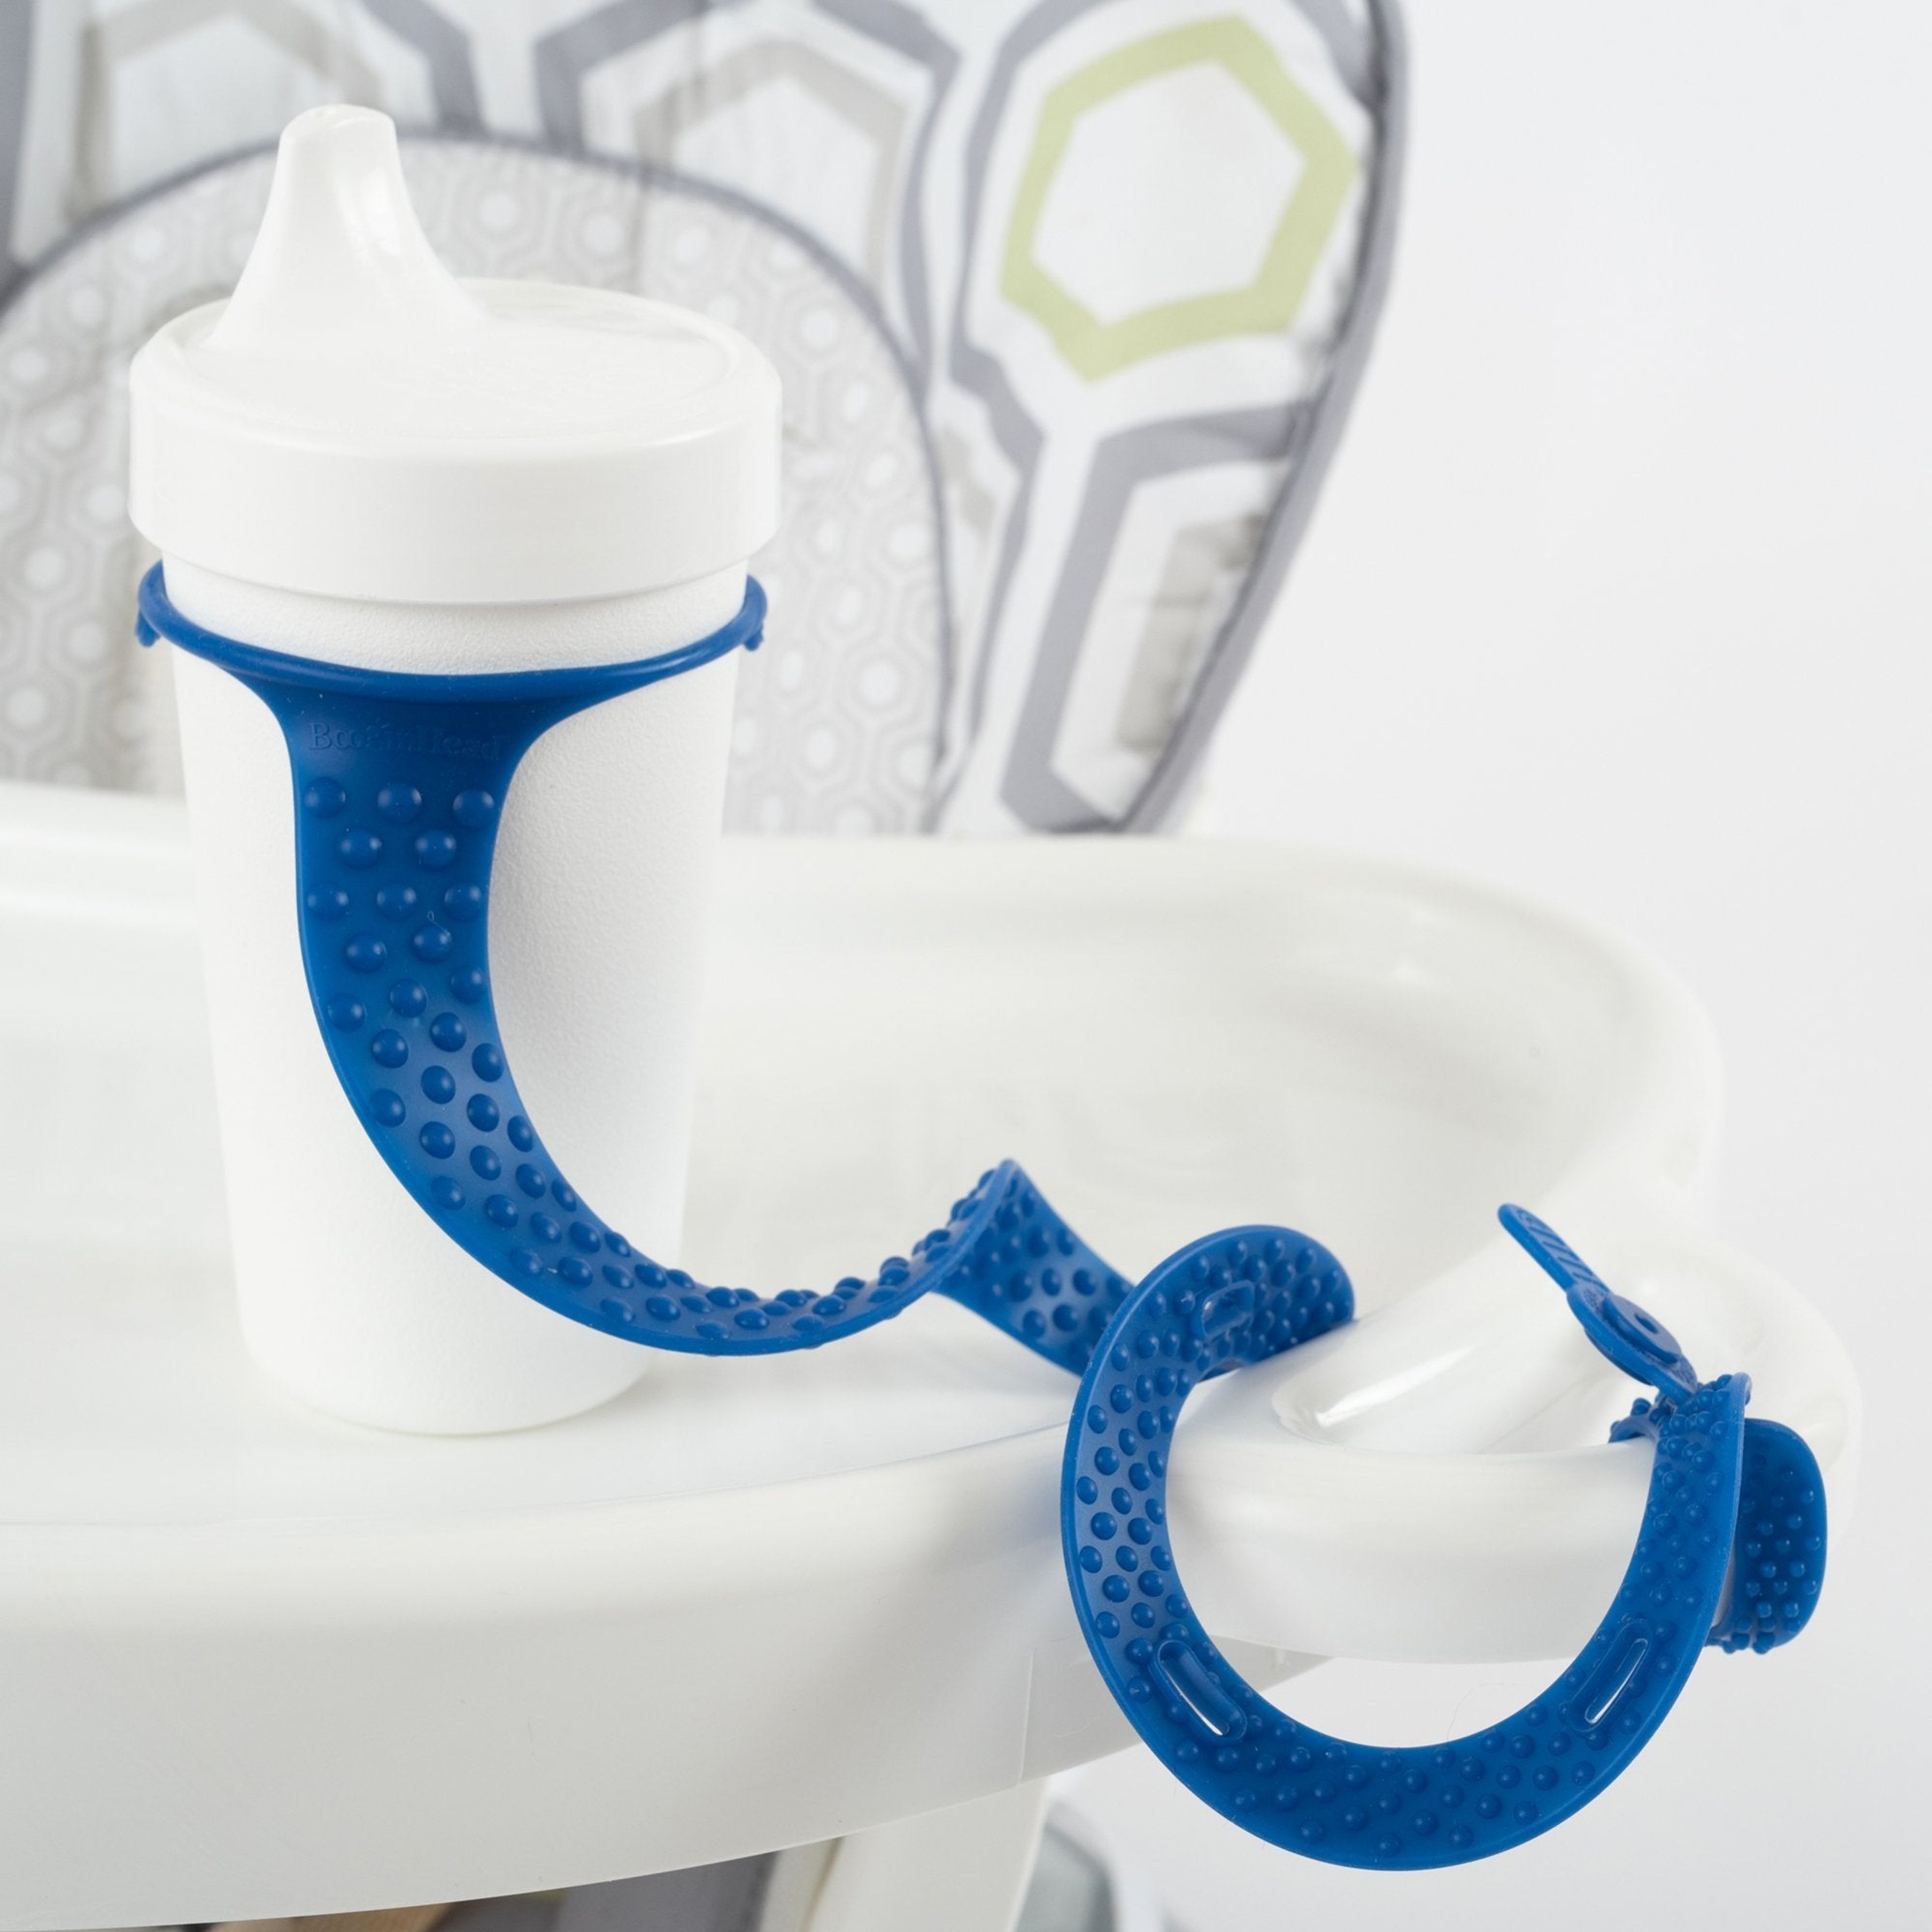 Silicone SippiGrip Cup & Toy Holders